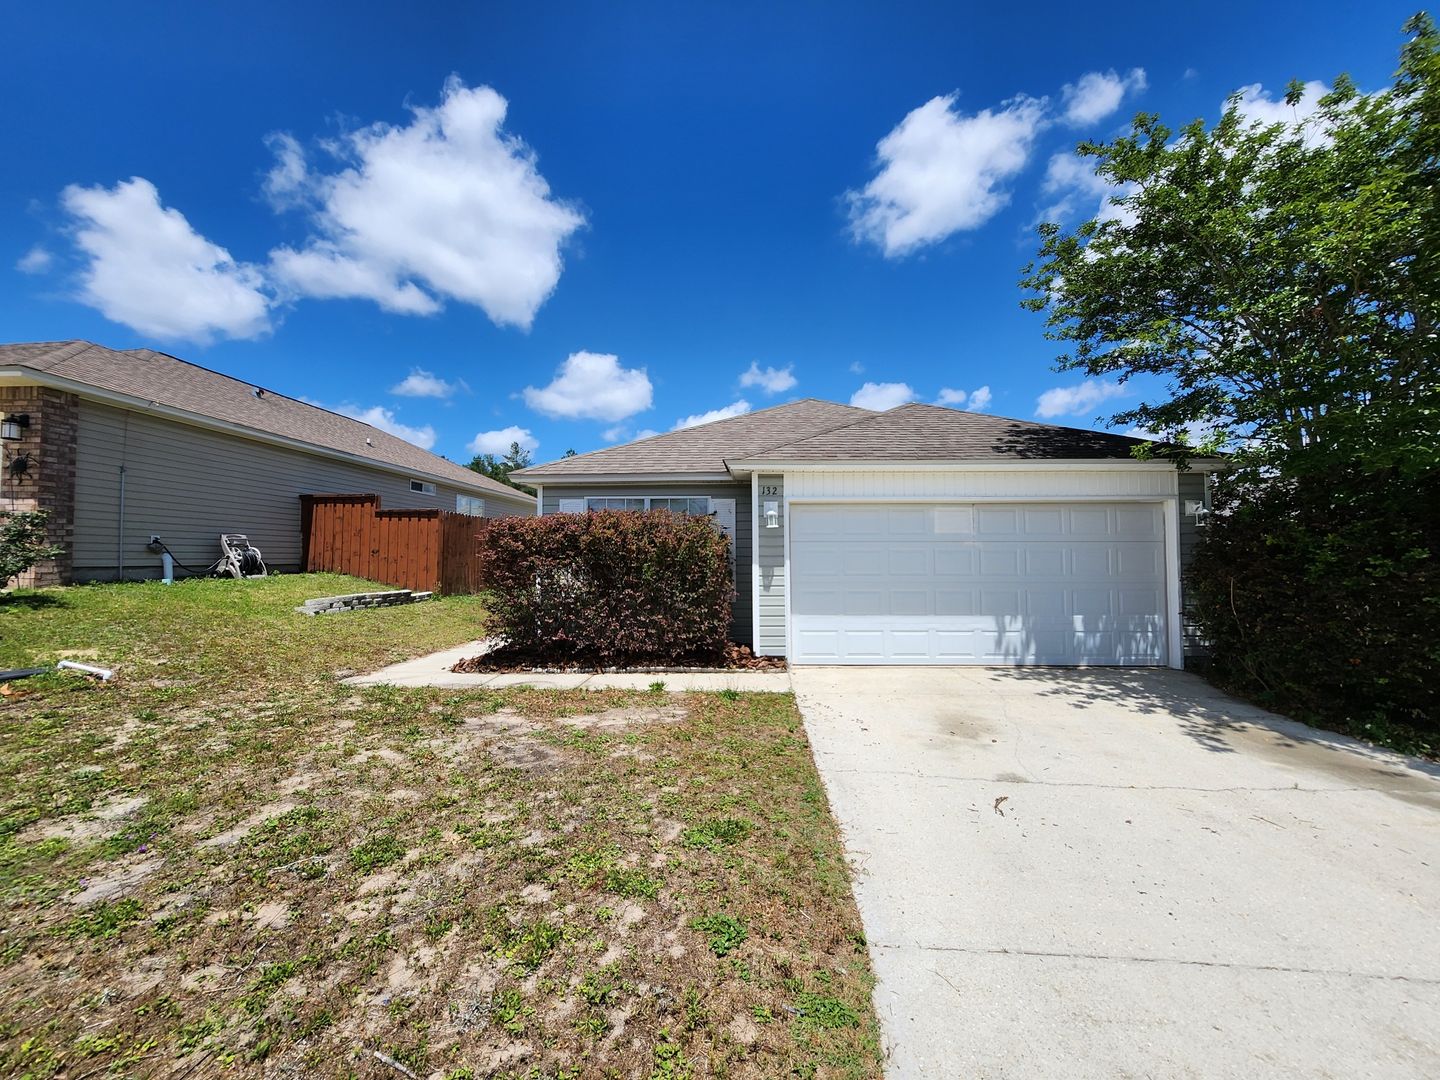 132 Nivana Drive Crestview, FL 32536 Ask us how you can rent this home without paying a security deposit through Rhino!